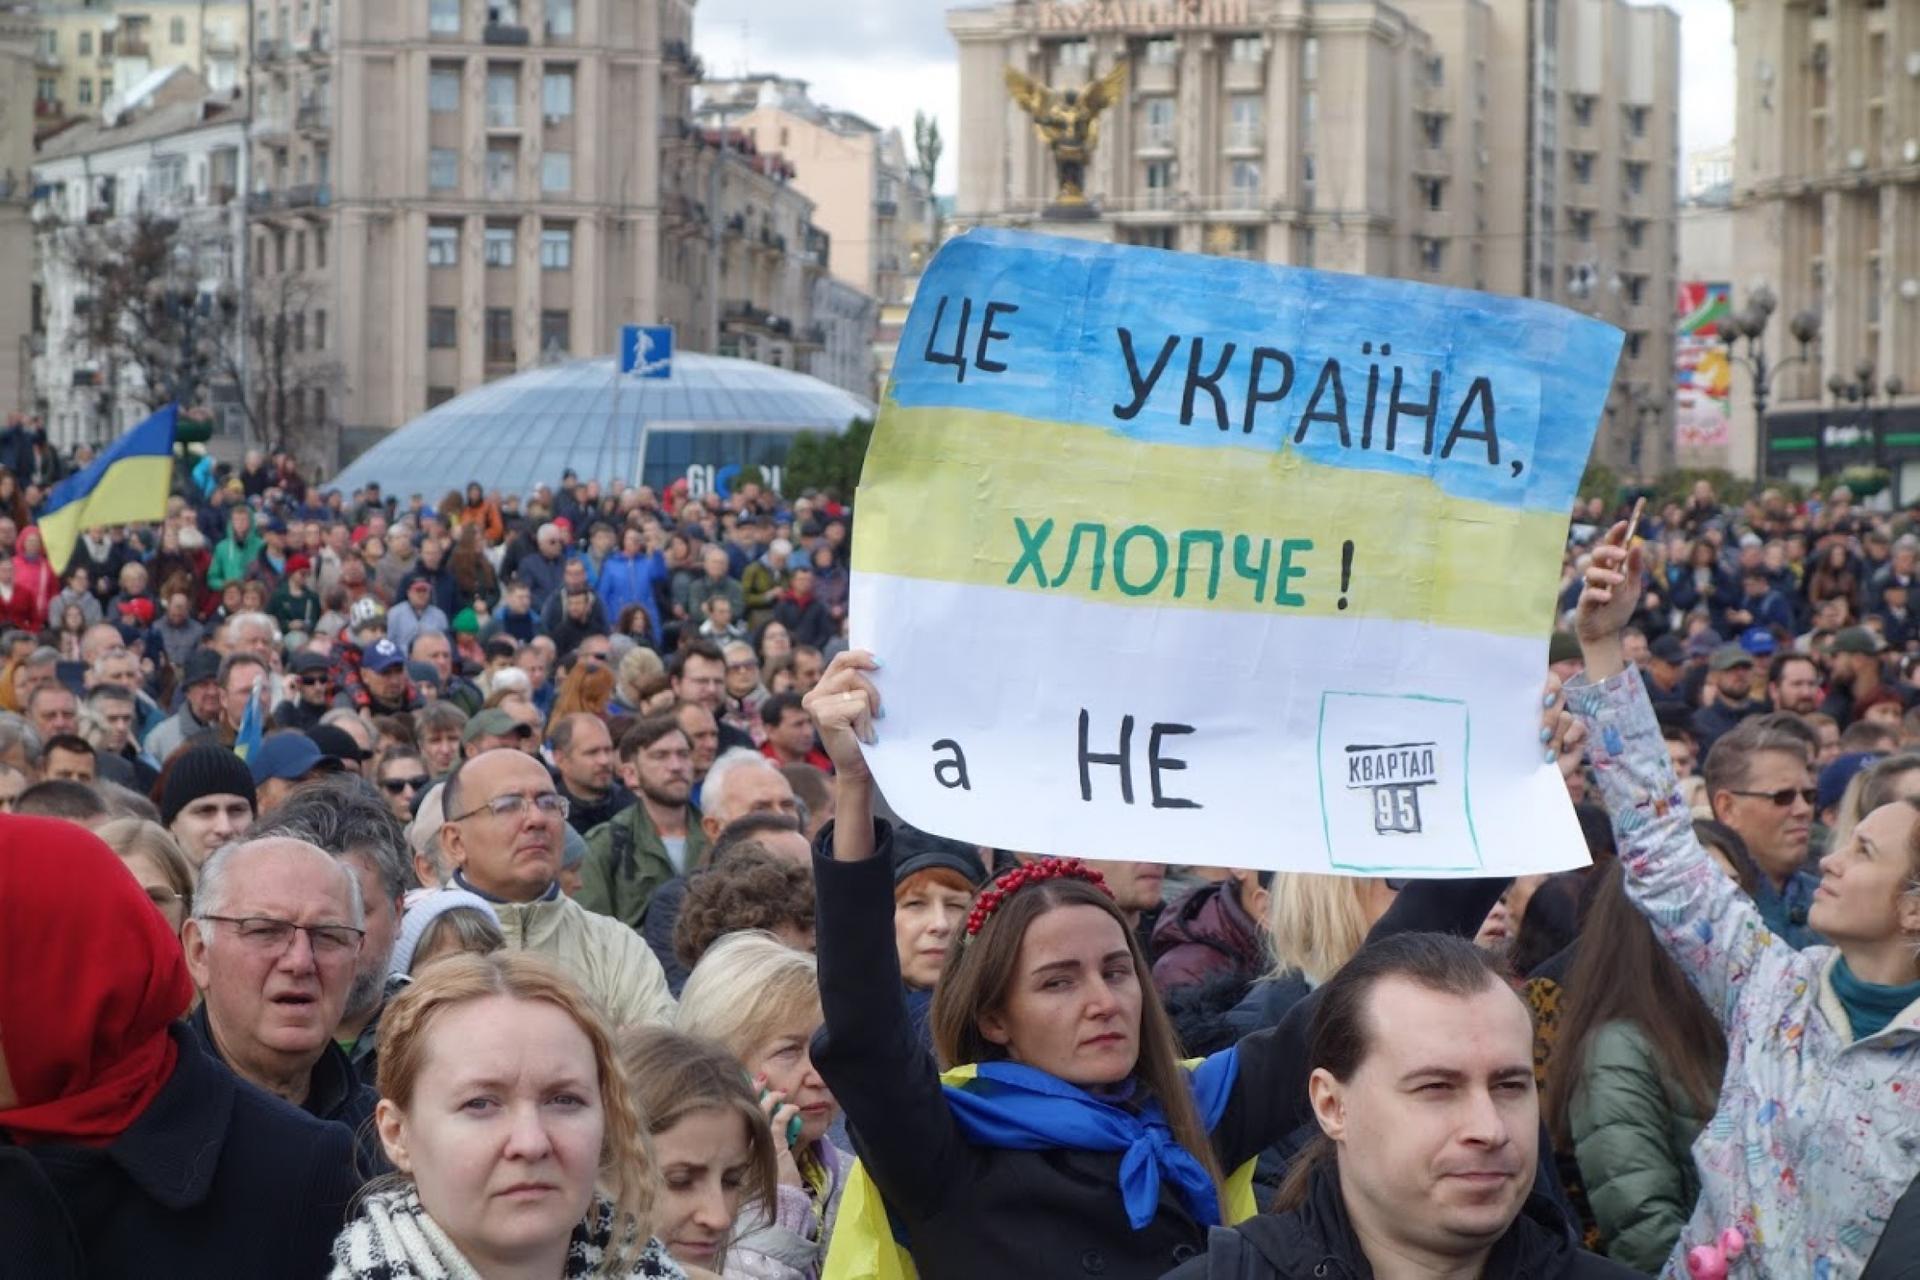 A protester holds a hand-written sign to call out Ukrainian President Volodymyr Zelenskiy during a protest.